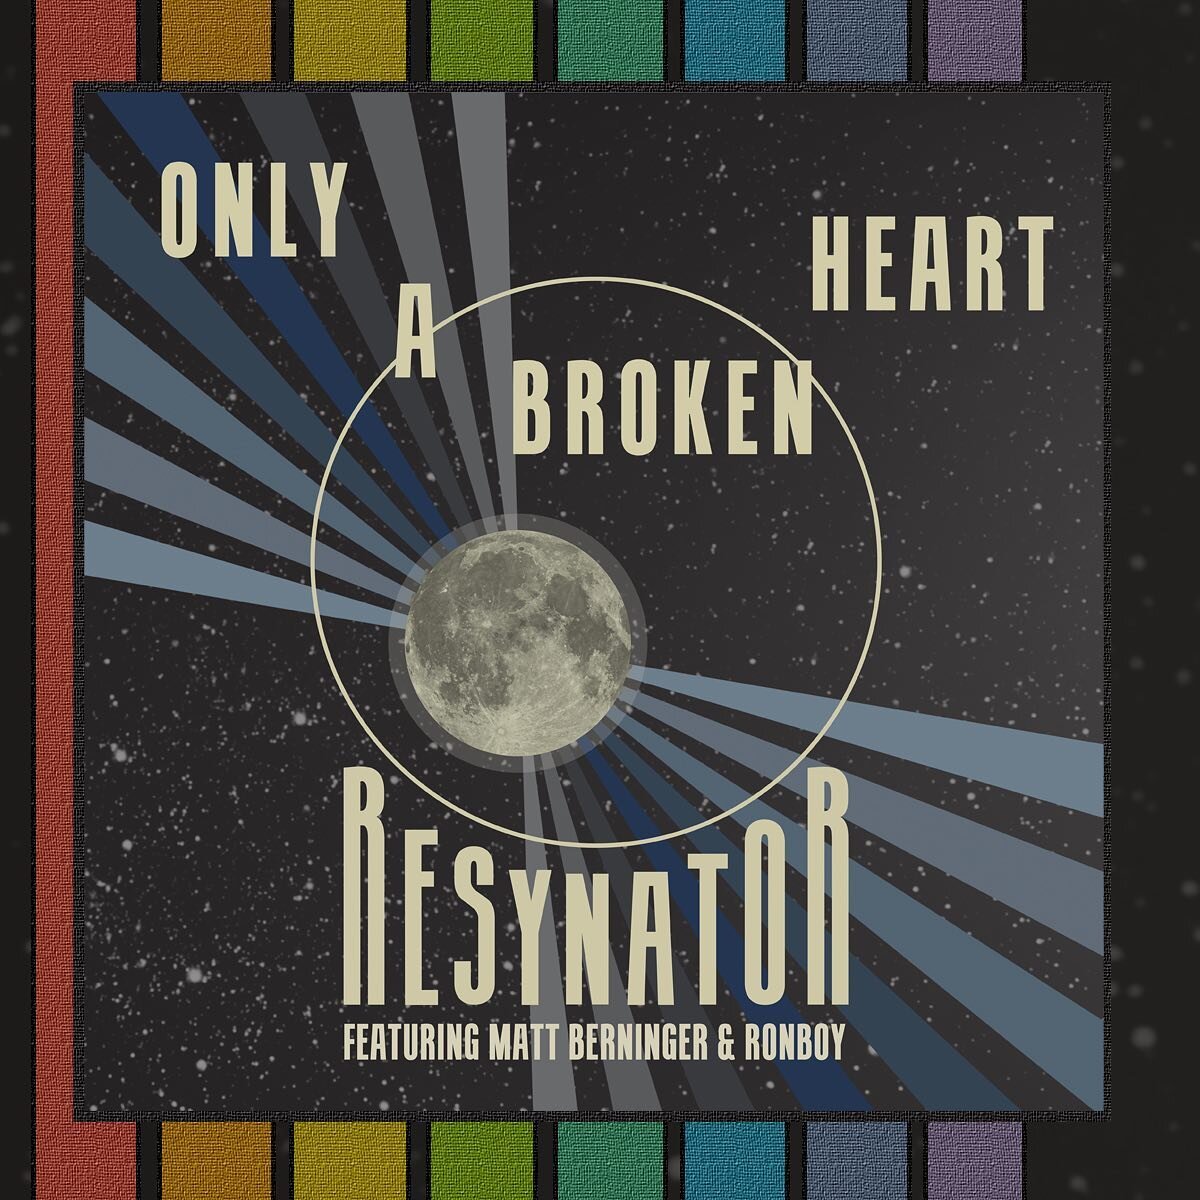 Only A Broken Heart - OUT NOW! There are so many delicate intricacies to this seemingly simple song, the Resynator in my opinion really shines here. And to have Matt Berninger and Ronboy sing a duet on this means more to me than I can put into words.